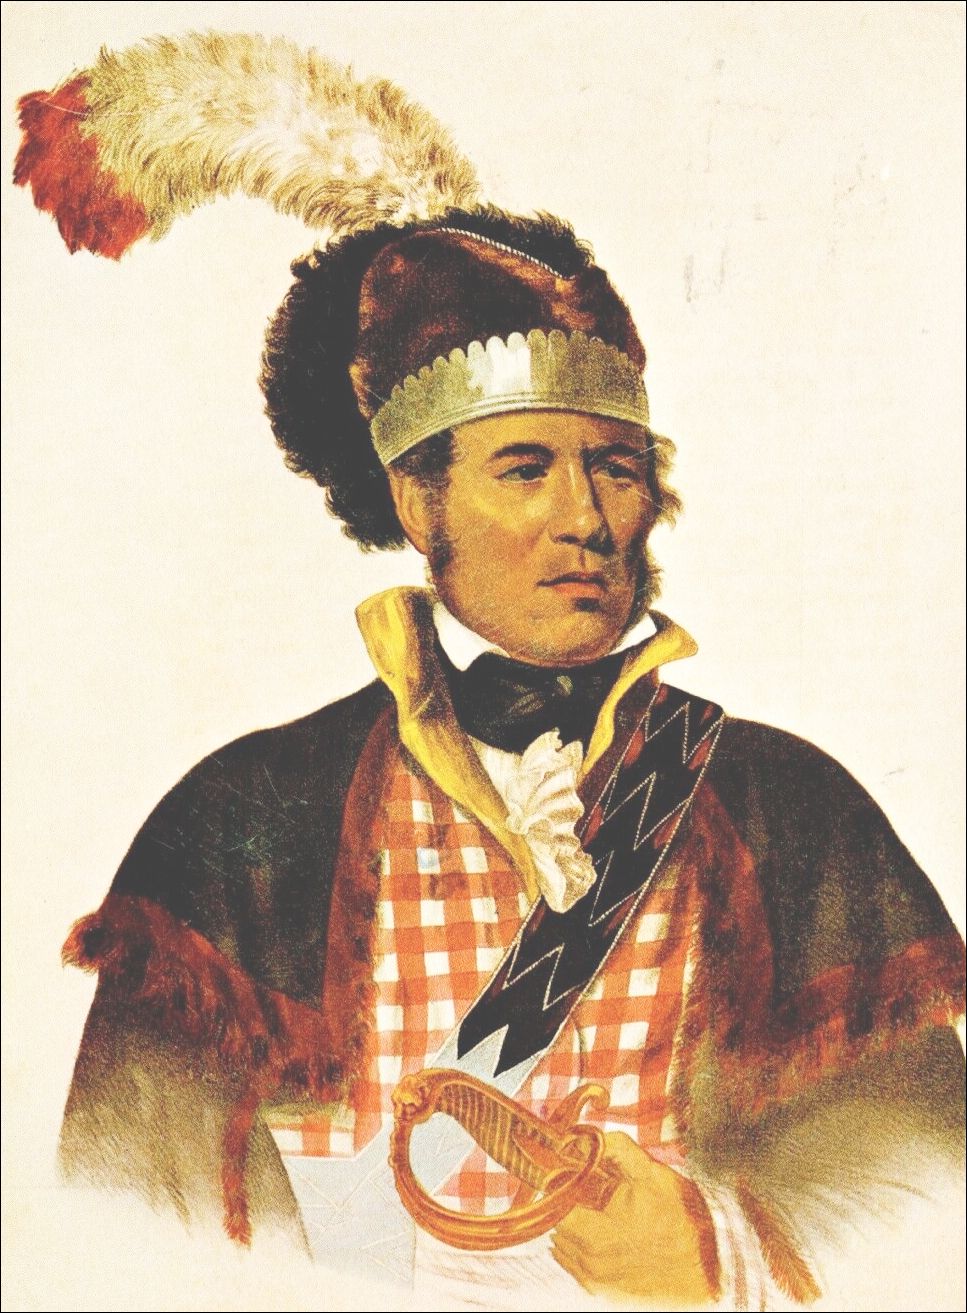 Chief of the Lower Creeks, William McIntosh, had a Scottish father and Creek mother. He favored accommodation and fought alongside white militia against the Red Sticks. He was murdered after signing the Treaty of Indian Springs ceding Creek land to Georgia. Gilcrease Museum